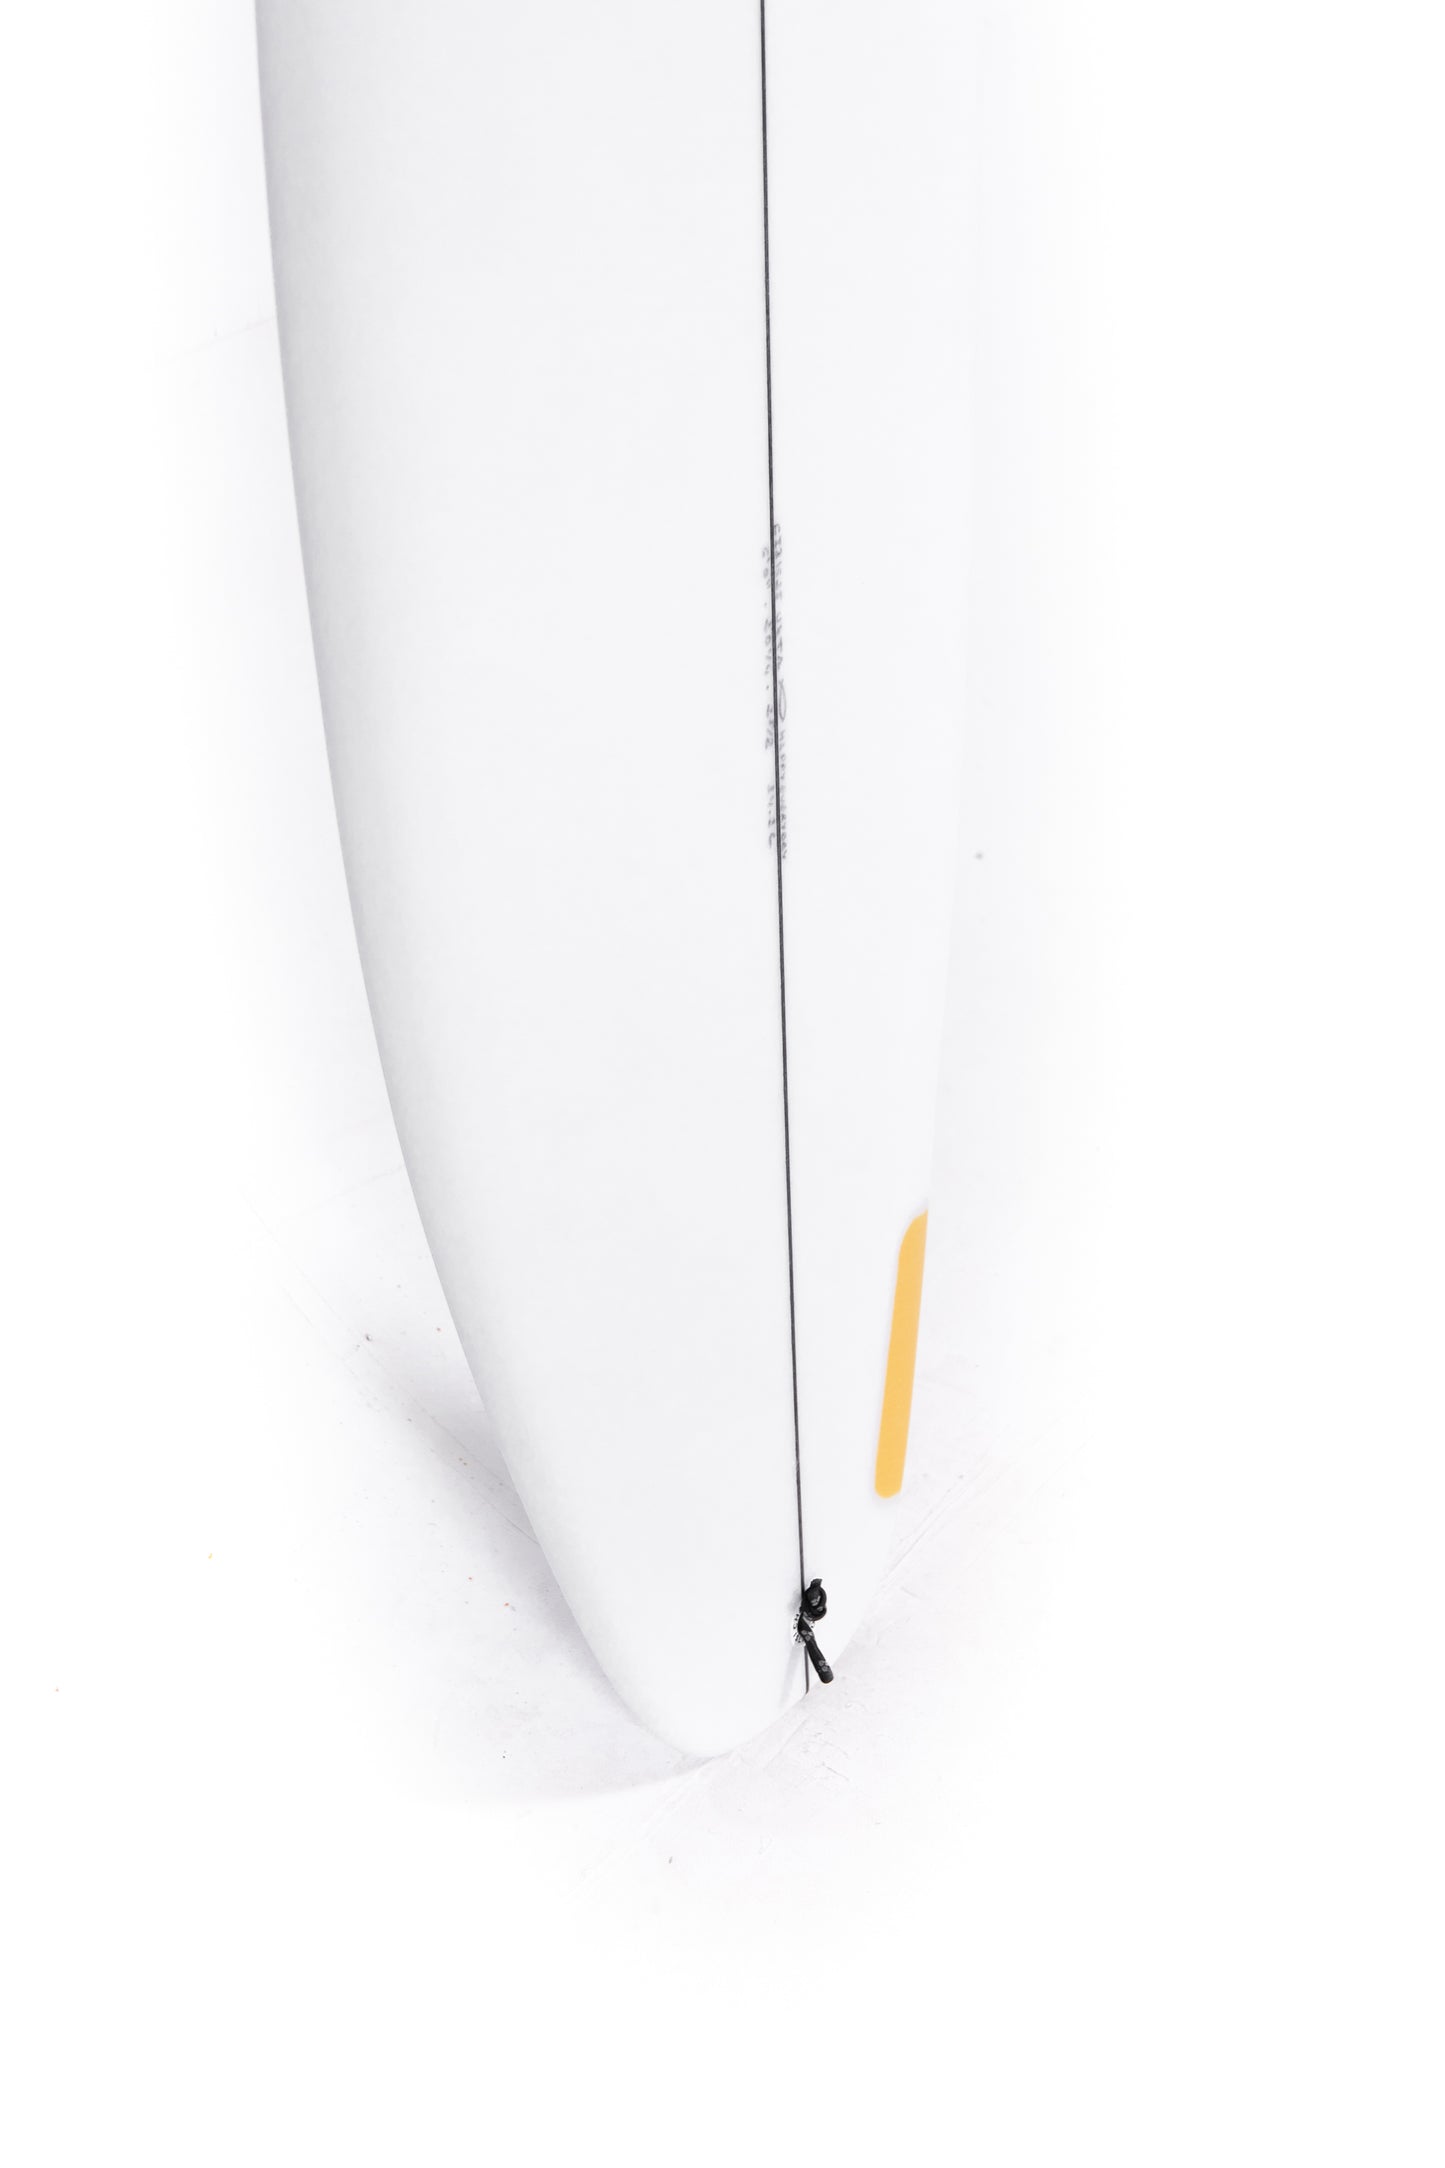 
                  
                    Pukas Surf Shop Channel Islands Surfboards Happy Everyday 6'0"
                  
                